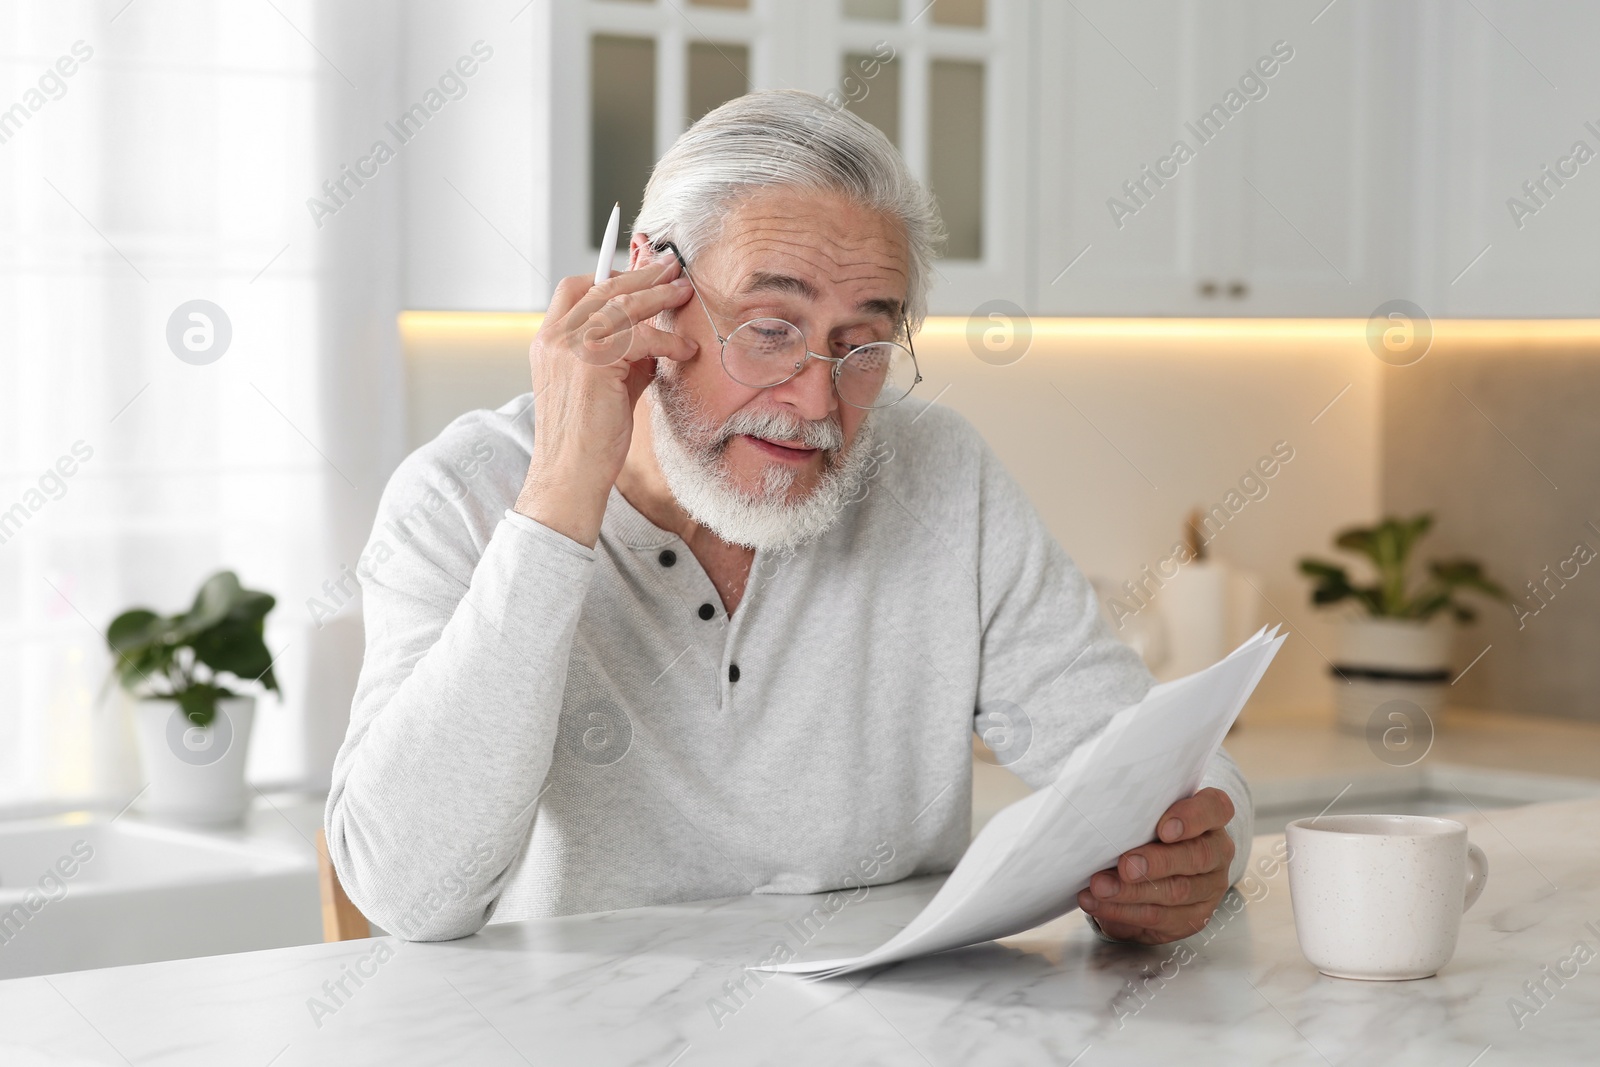 Photo of Senior man solving crossword at table in kitchen